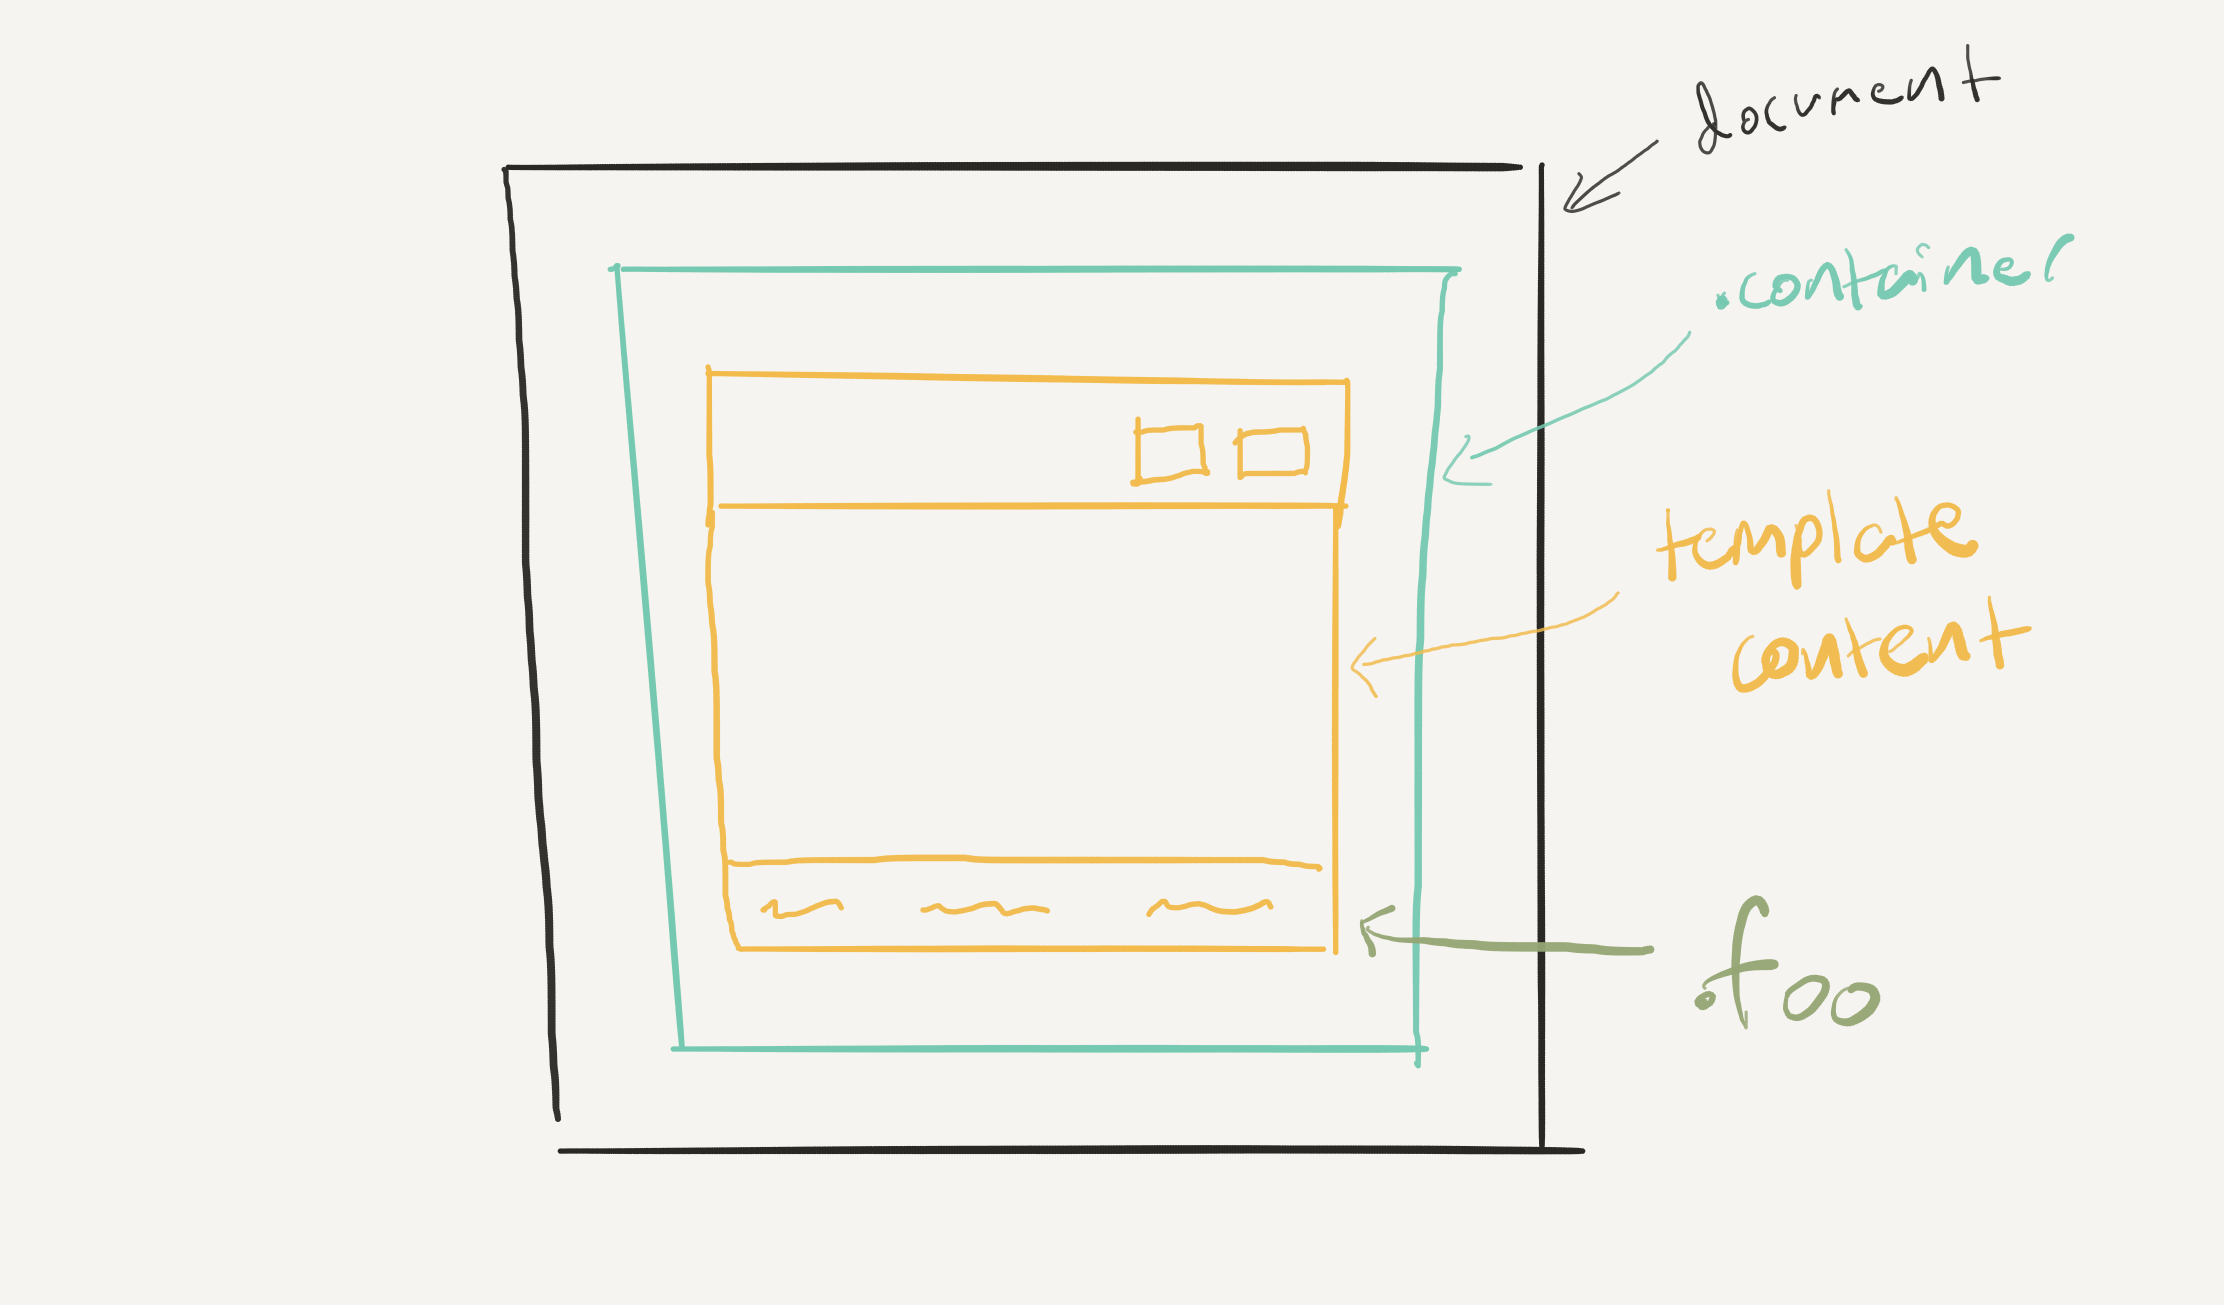 Diagram of document, container, and template markup.